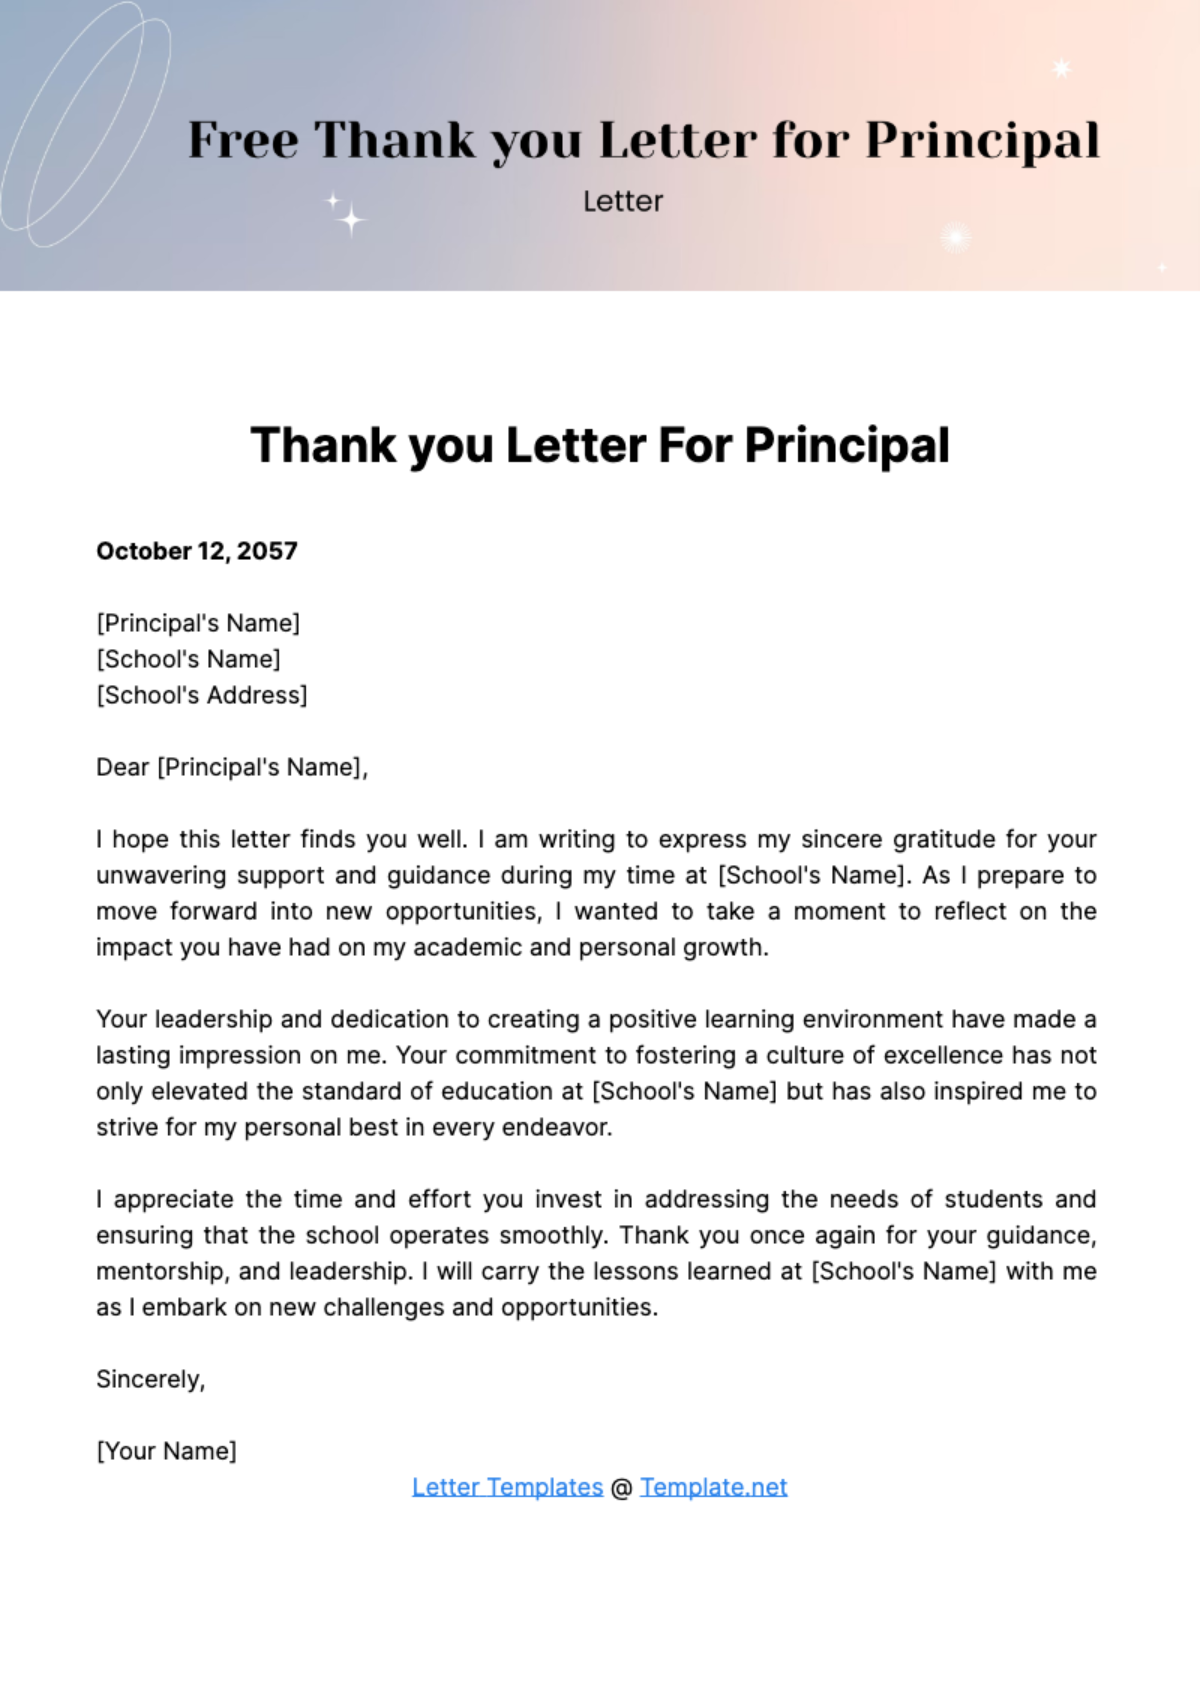 Thank you Letter for Principal Template